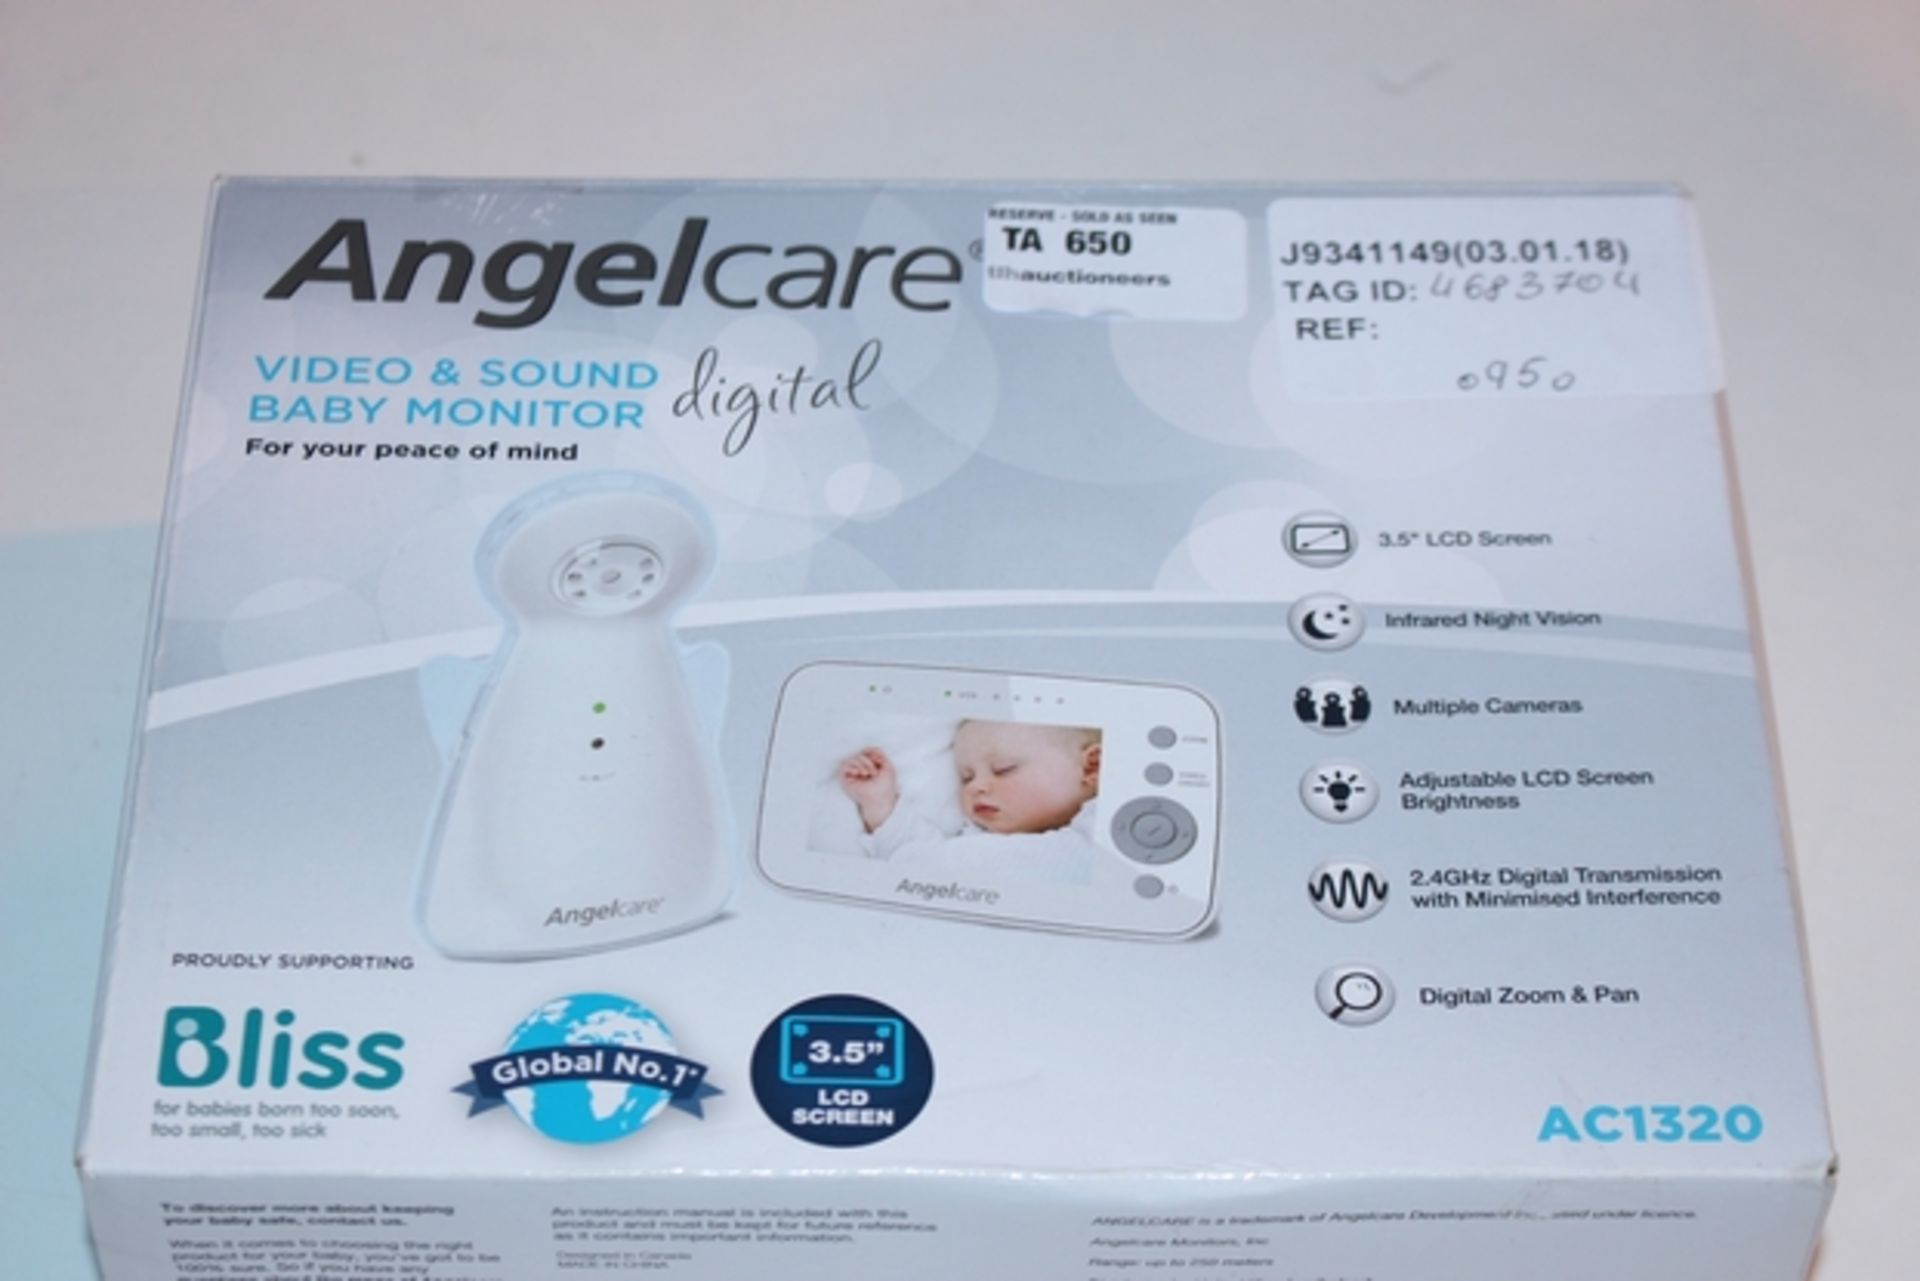 1X ANGEL CARE VIDEO AND SOUND DIGITAL BABY MONITOR RRP £100 (JL-9341149) (03/01/18) (4683074)